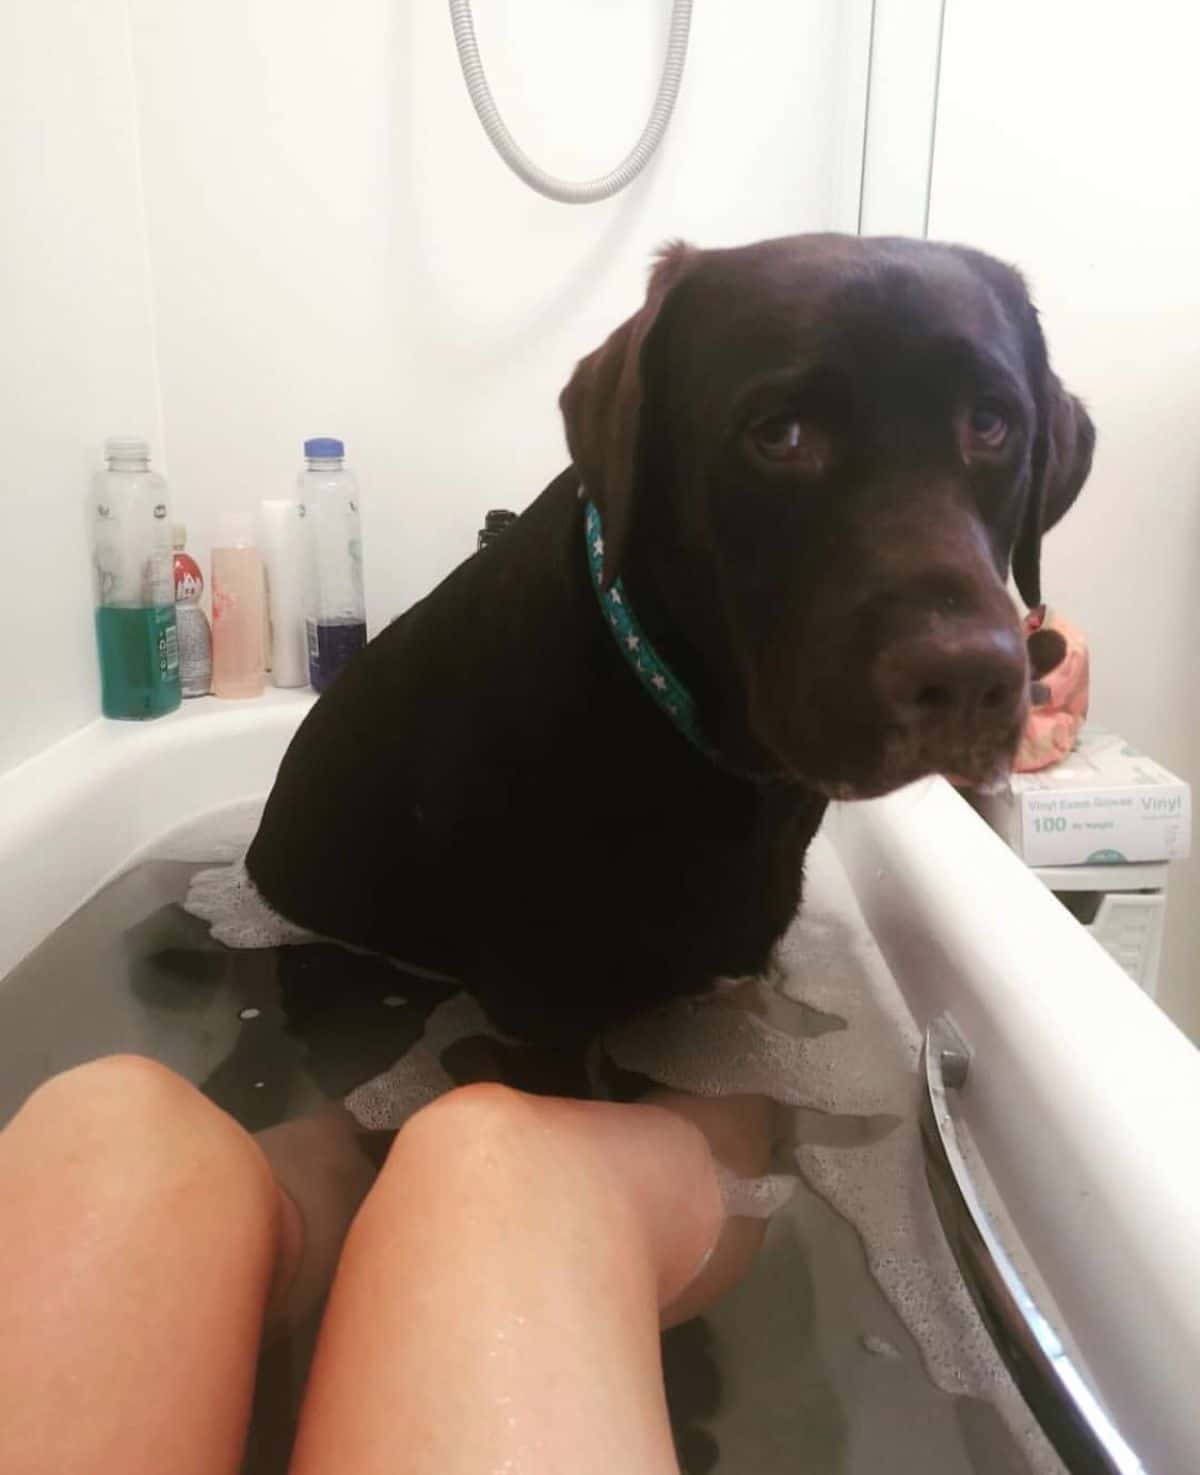 chocolate labrador retriever in a bath with a person's legs showing